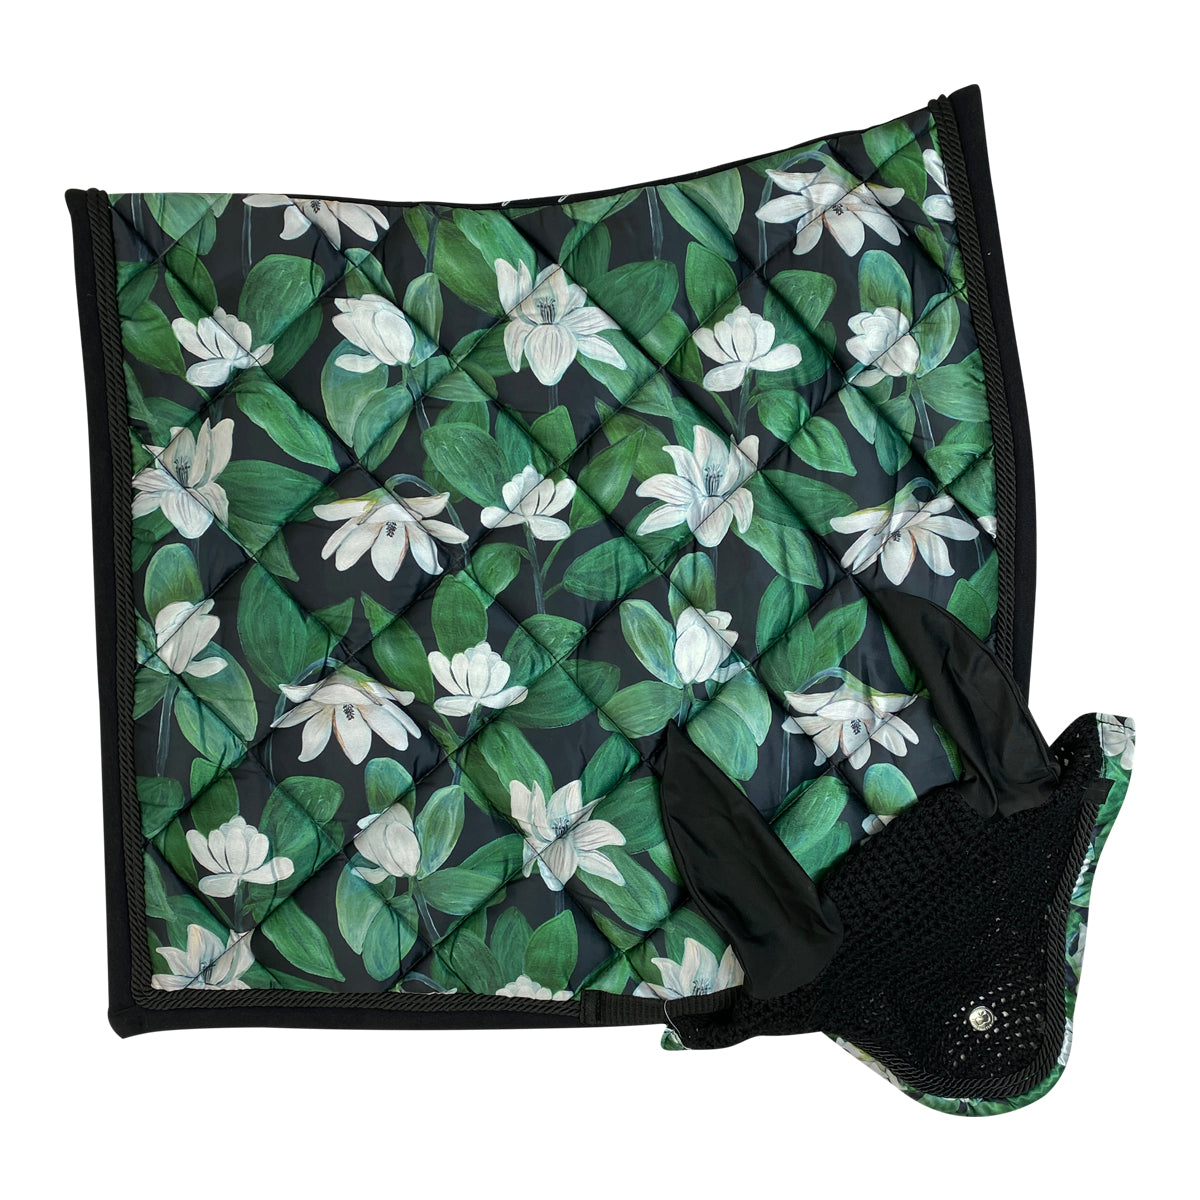 SADDLE PAD AND BONNET, GREEN